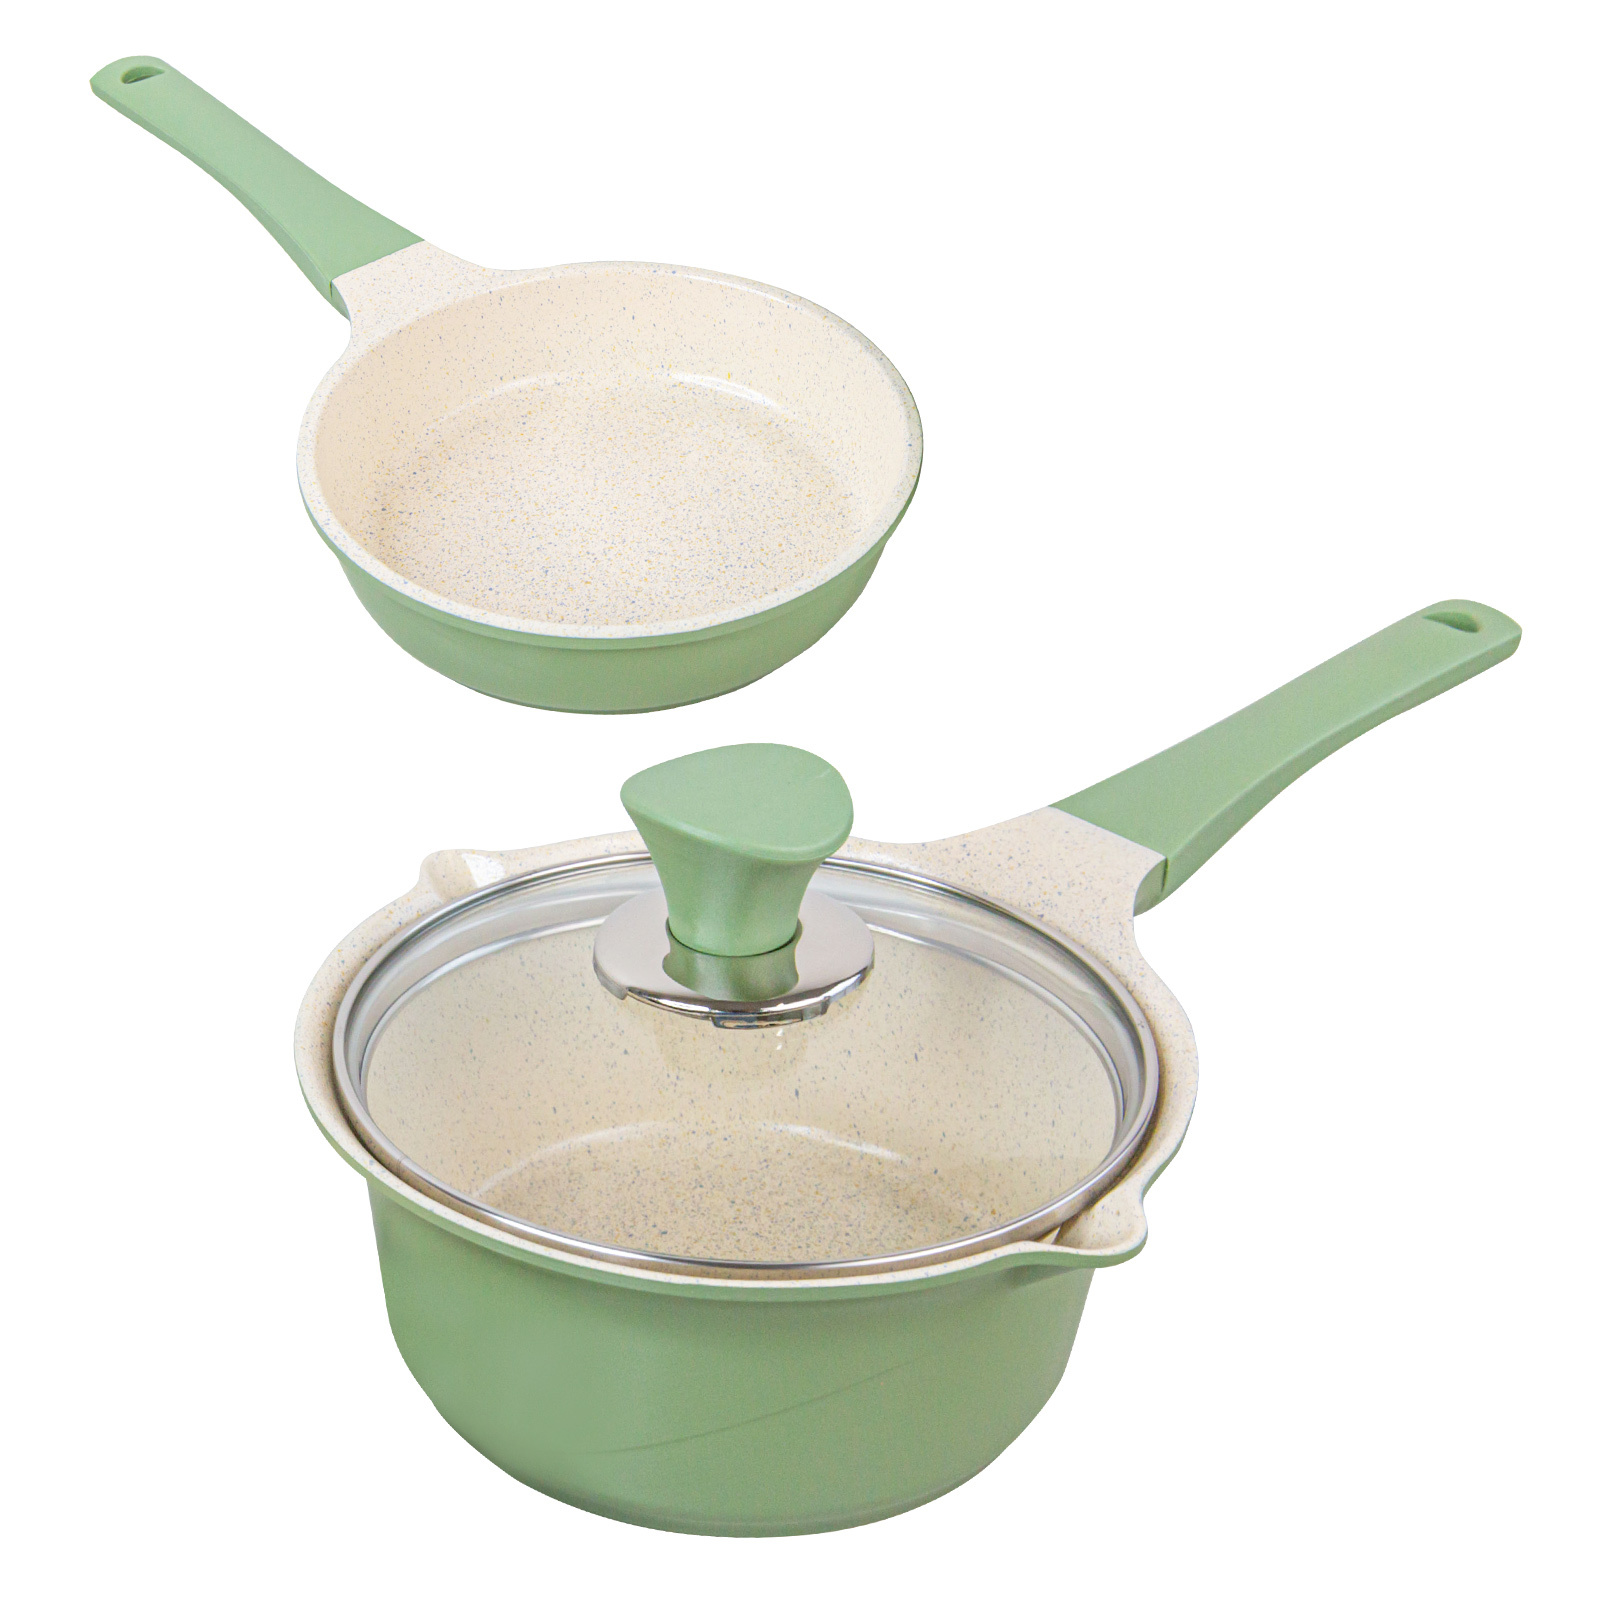 Happy Lambs 16cm Sauce Pot Frying Pan w/ a Lid Set Non-Stick Stone Induction IH Frypan – Olive